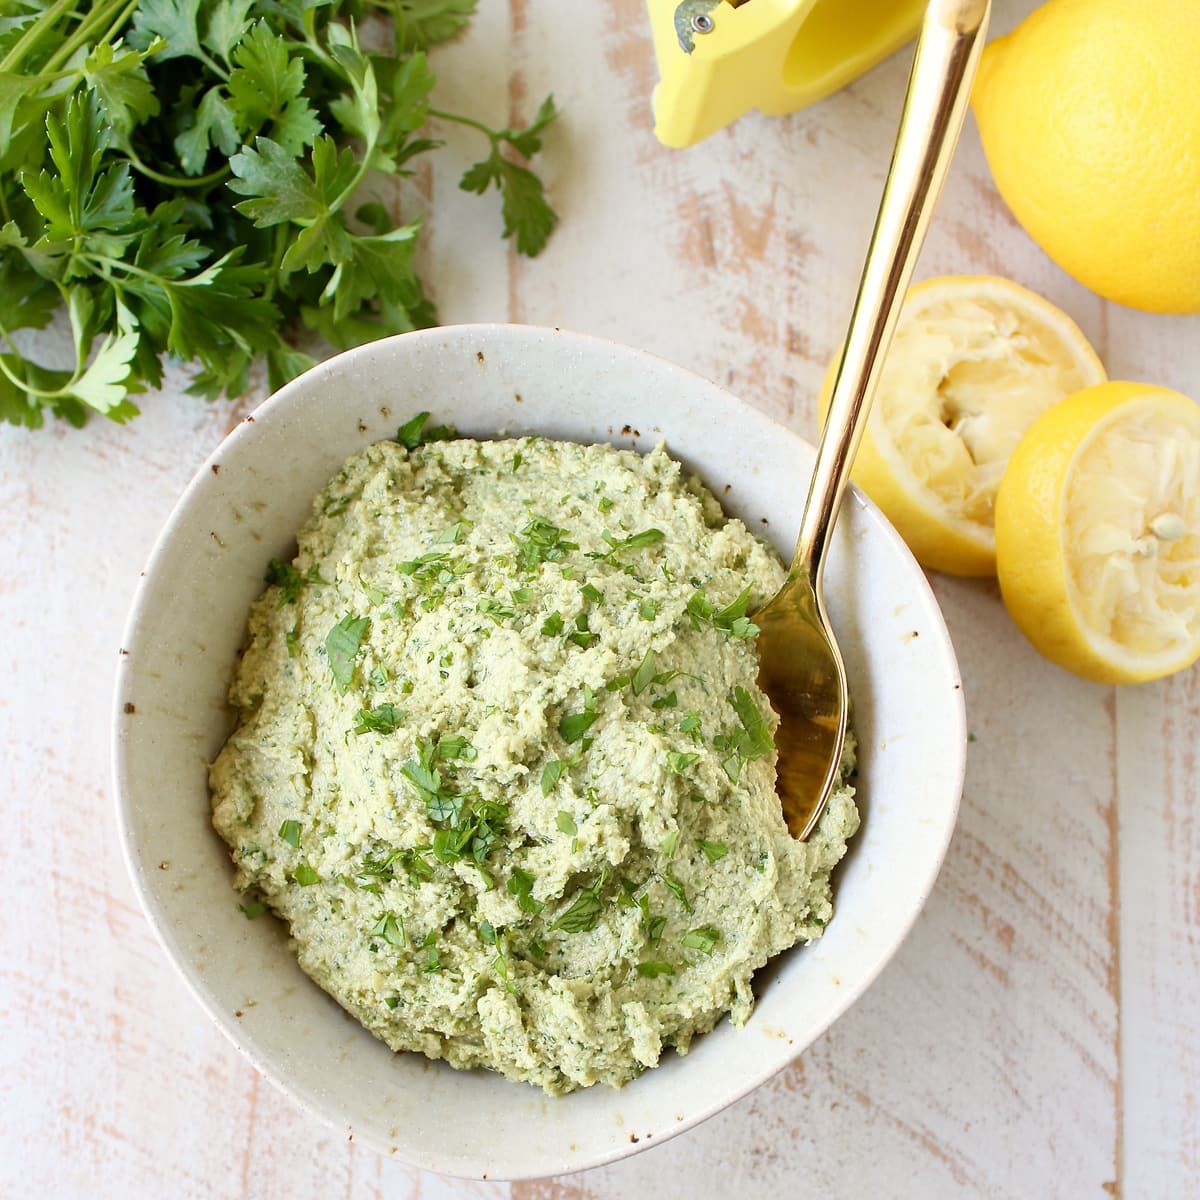 This healthy, vegan and gluten free Green Tahini Sauce Recipe is perfect for topping buddha bowls, chicken and fish, or serve it as a dip with veggies!